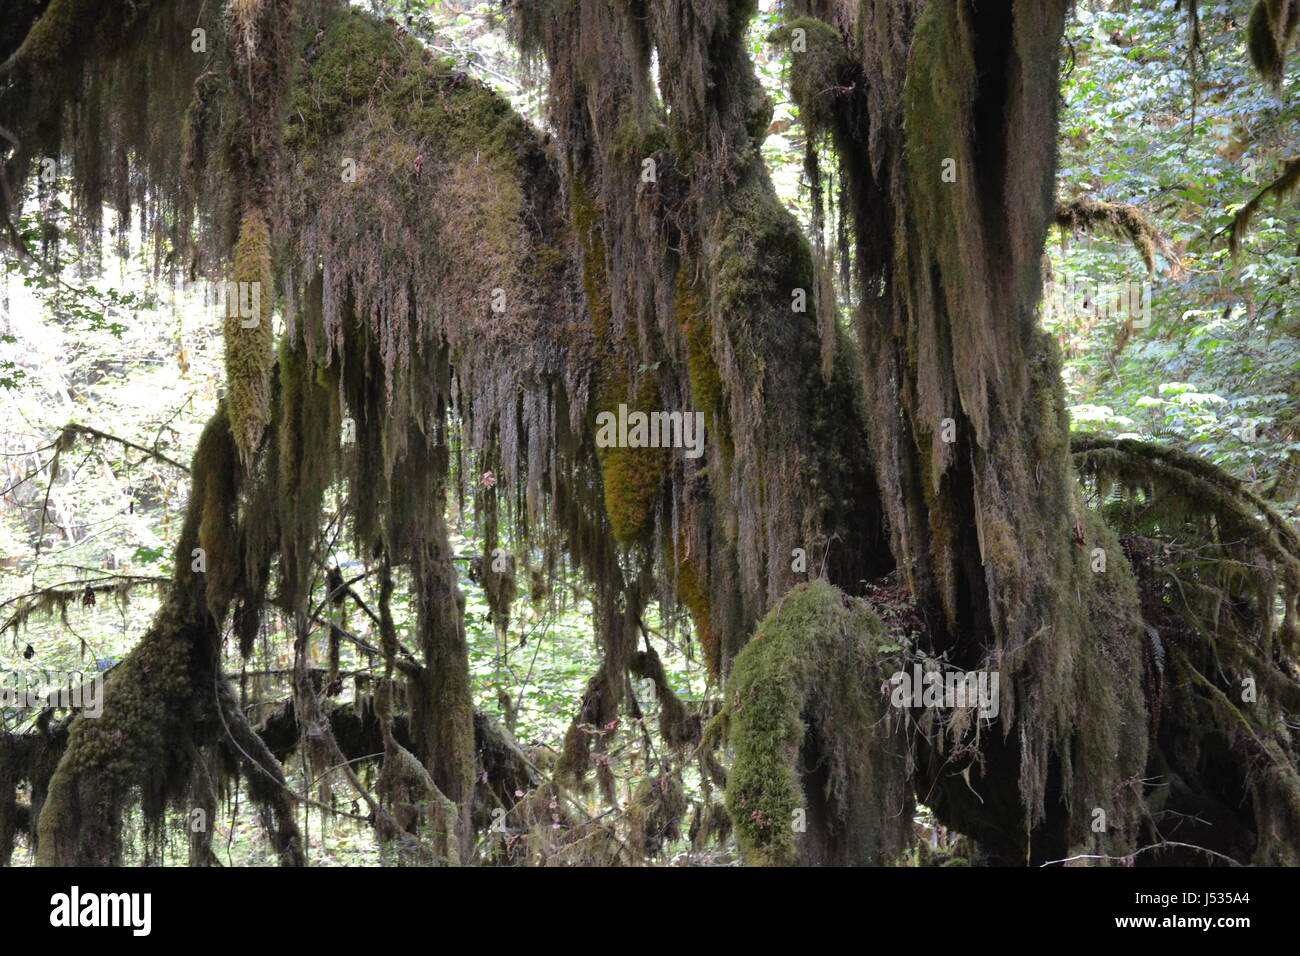 trees-with-old-man-beards-stock-photo-alamy